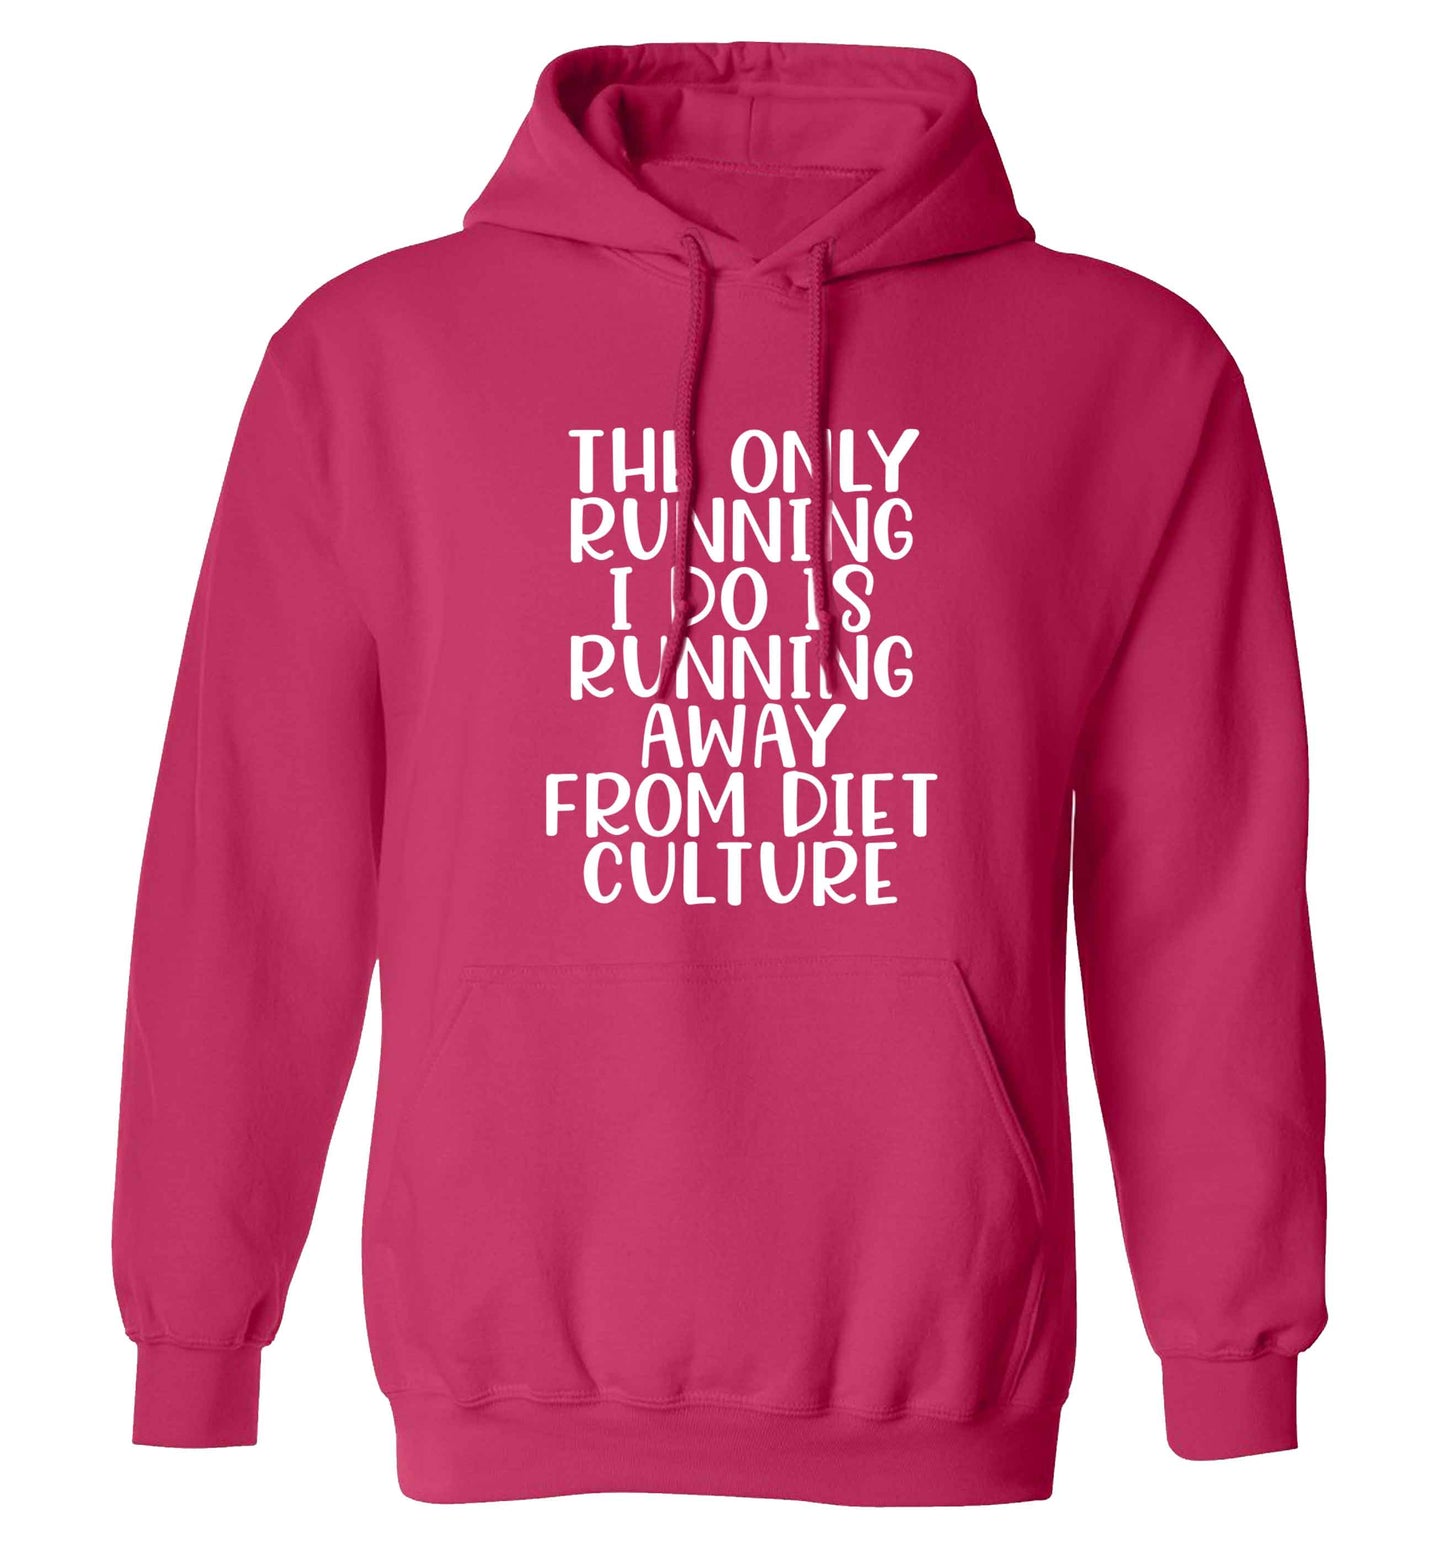 The only running I do is running away from diet culture adults unisex pink hoodie 2XL